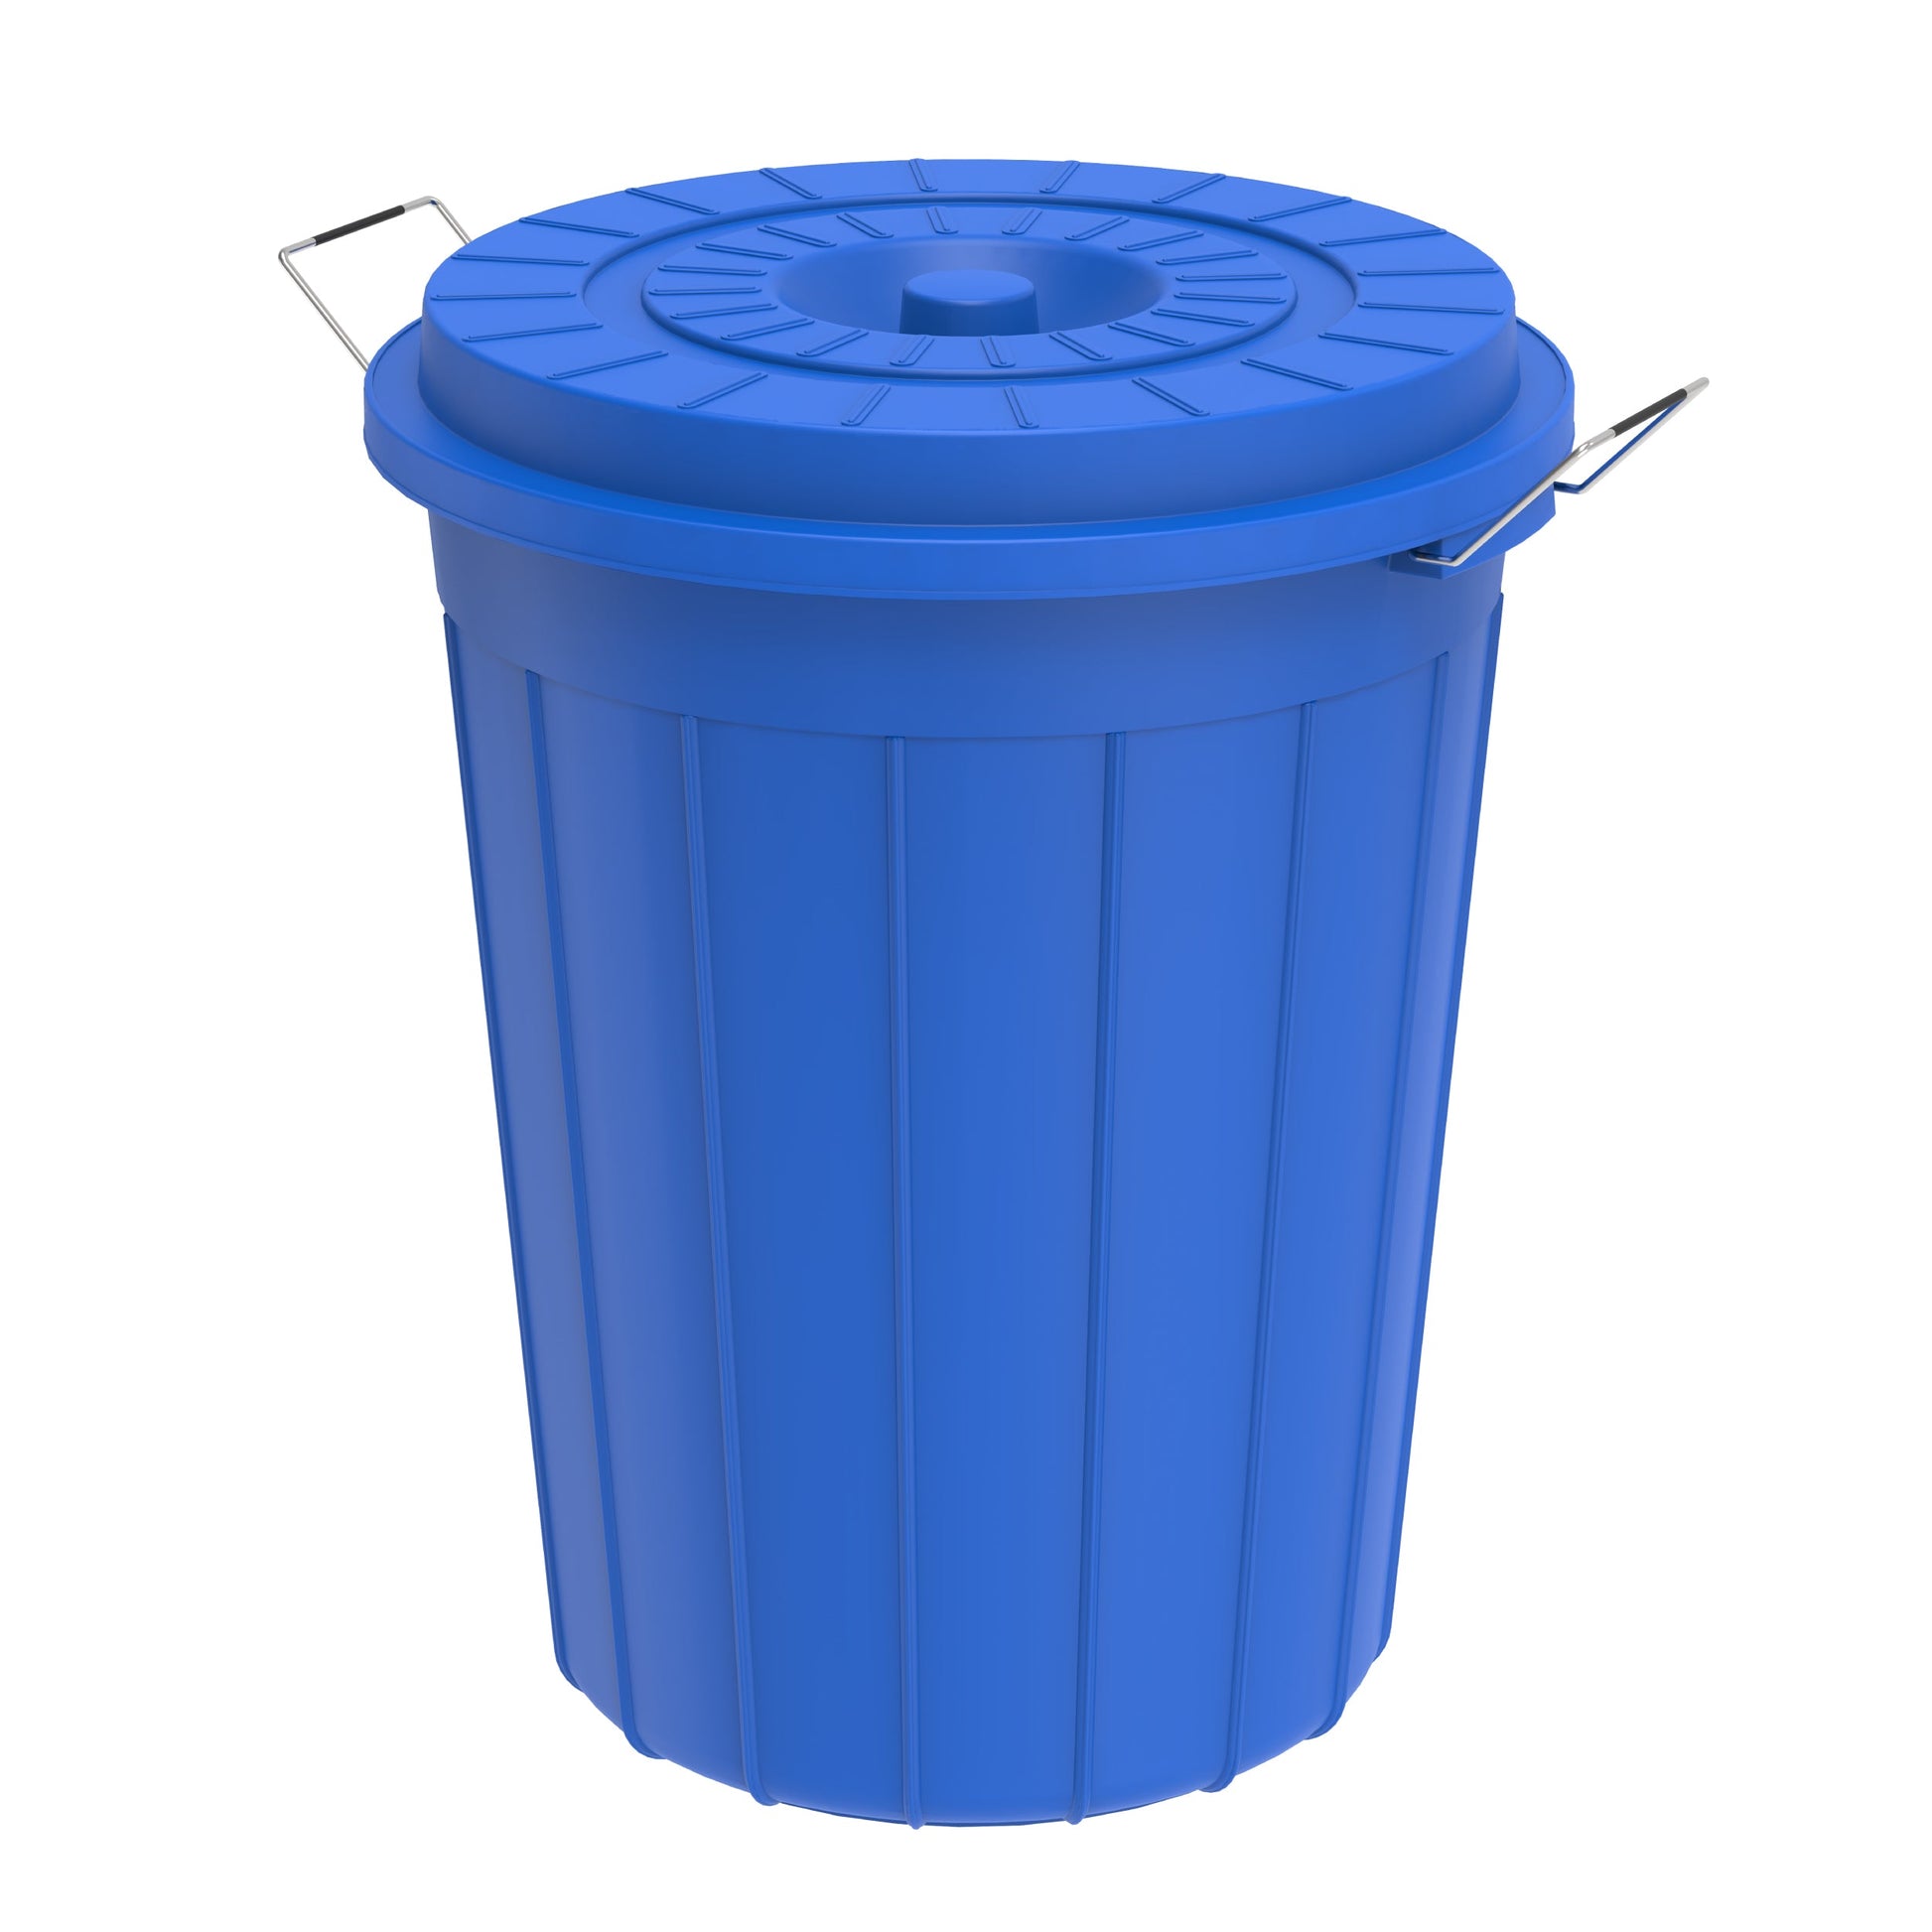 125L Round Plastic Drums with Lid - Cosmoplast Bahrain